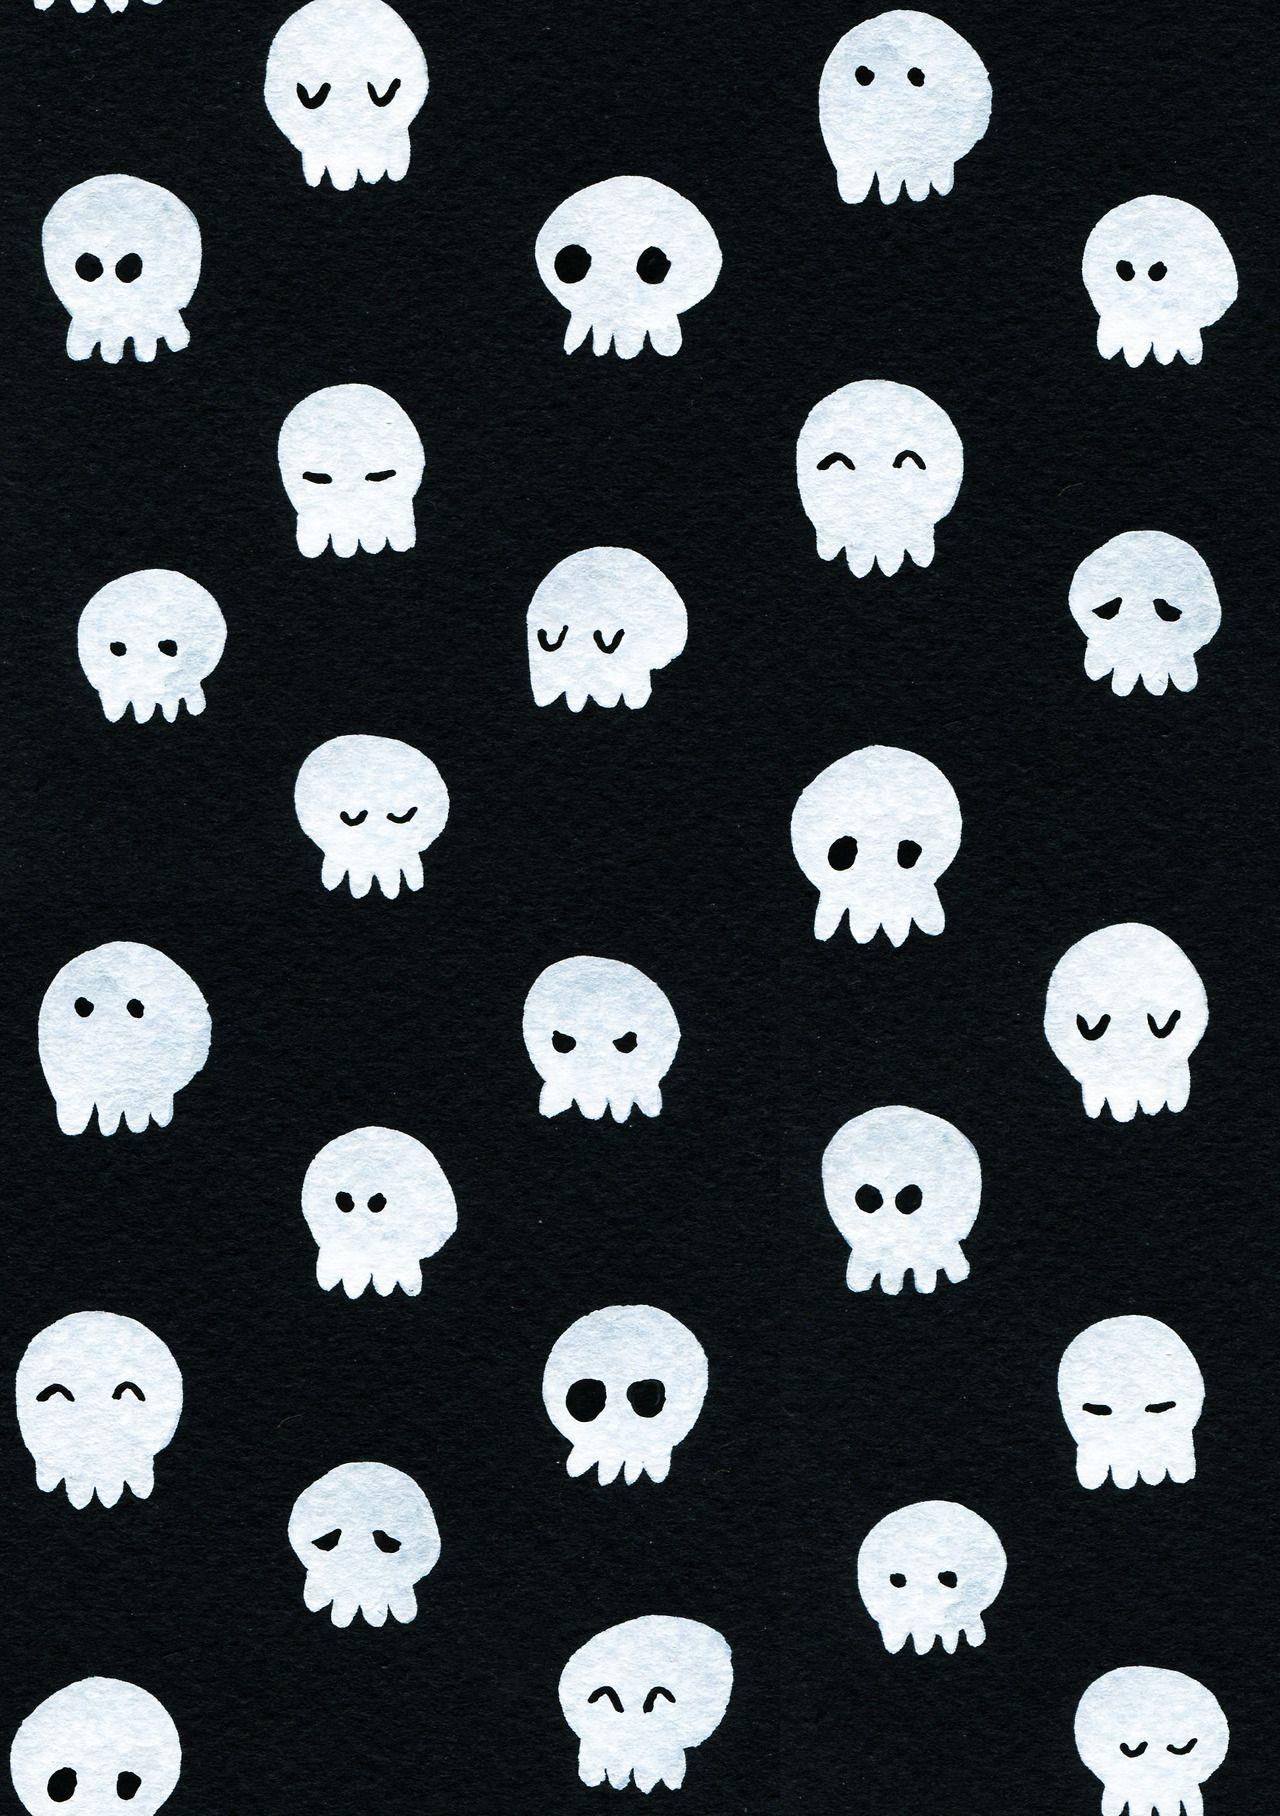 I Promise I&;m Not Only Going To Post Halloween Themed Illustrations This Month But They&. Skull Wallpaper, Halloween Wallpaper Iphone, Bee Illustration